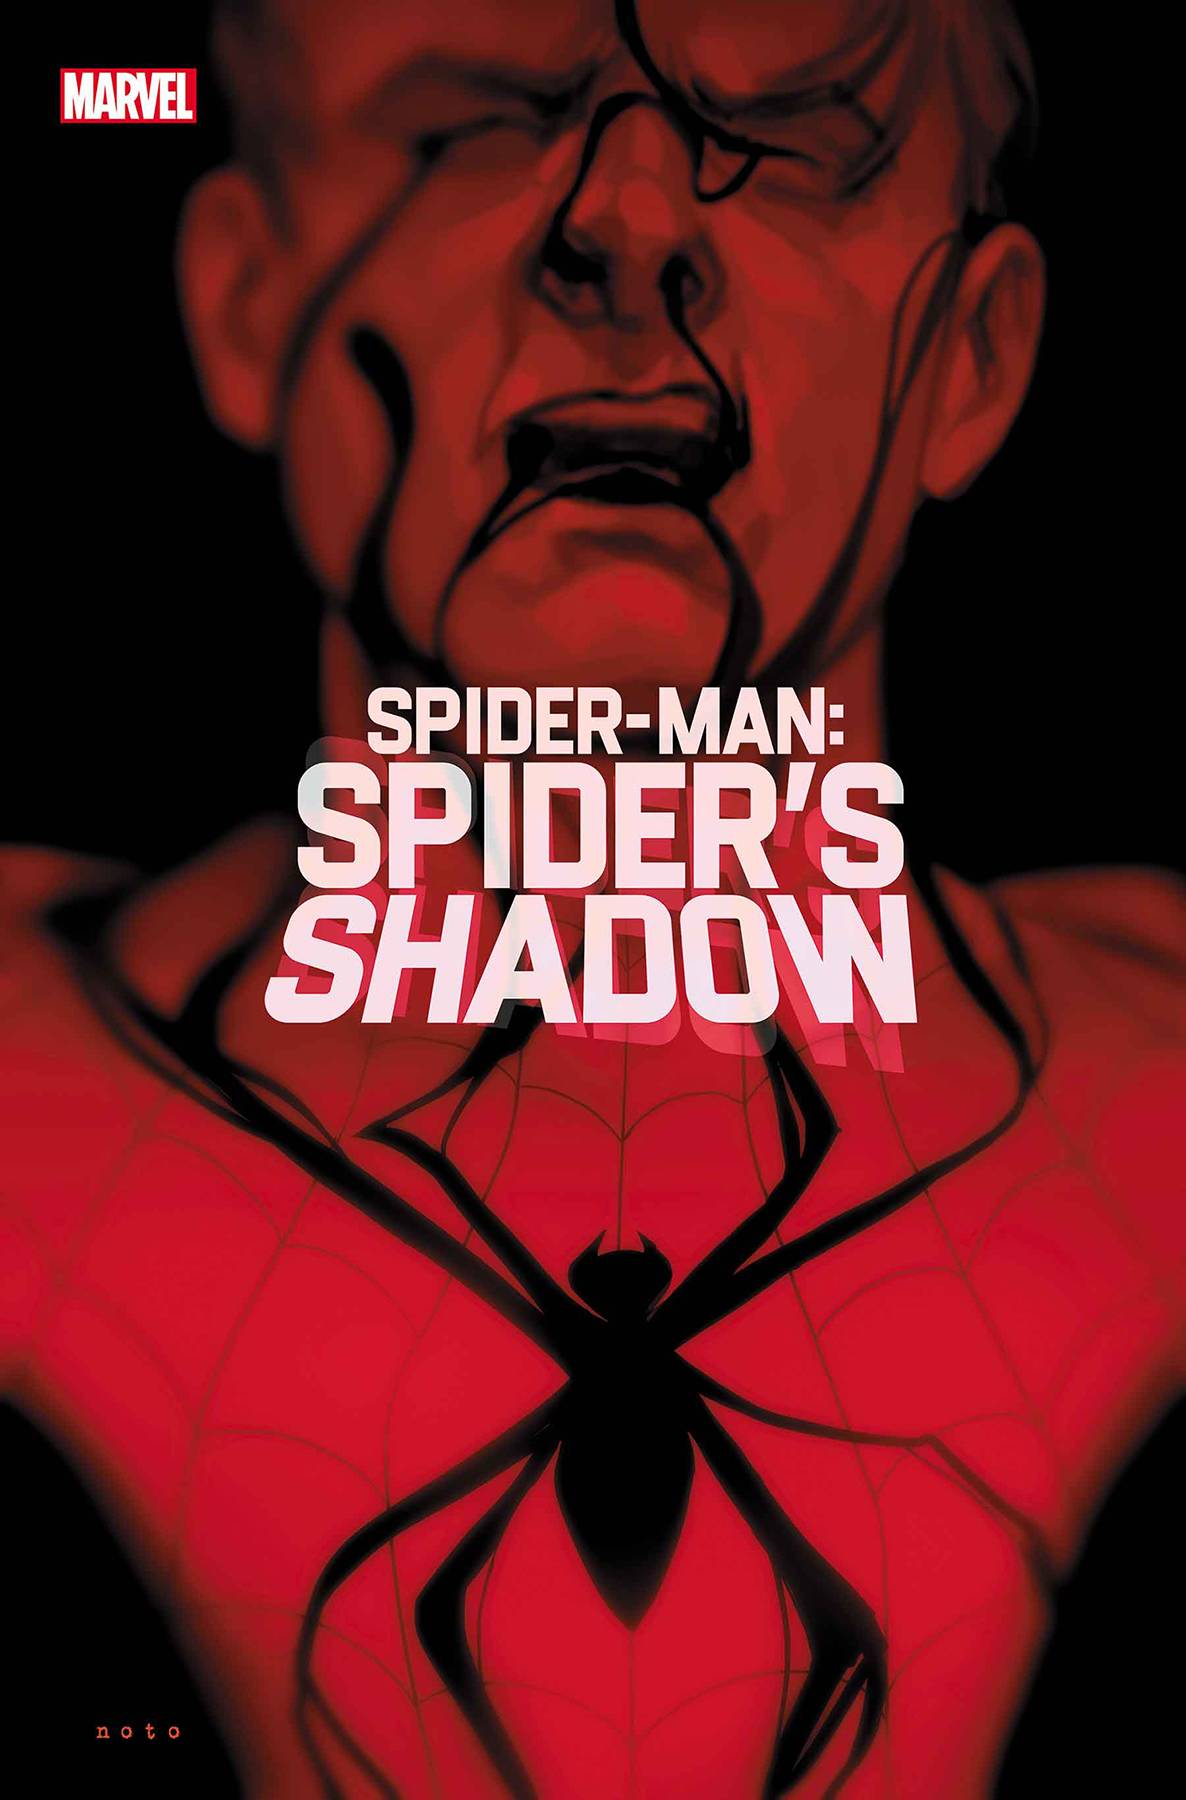 SPIDER-MAN SPIDERS SHADOW #1 (OF 4) 04/14/21